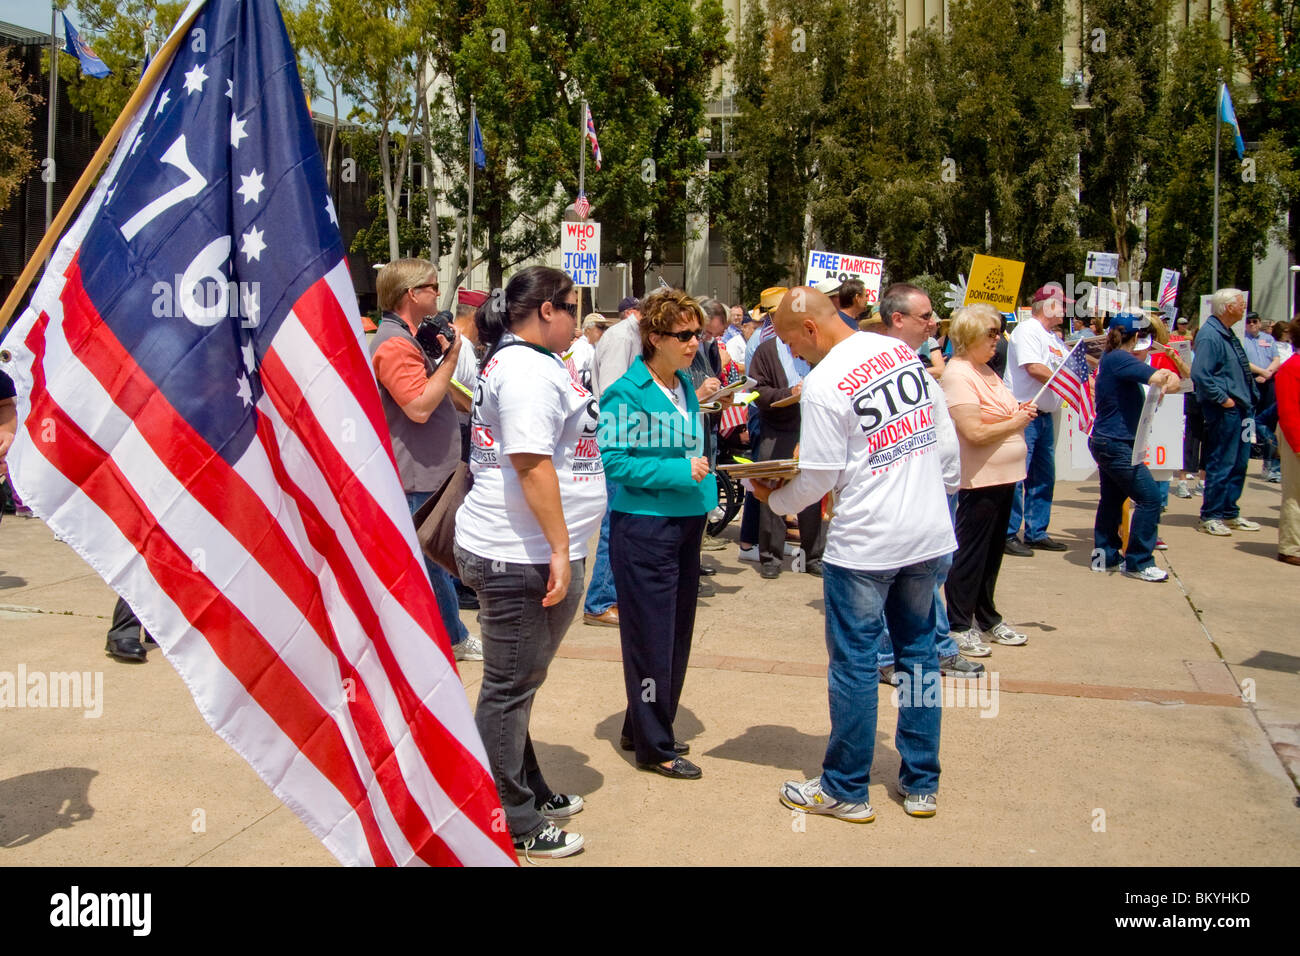 Protesters at a 'Tea Party' rally on April 15 (Tax Day) in Santa Ana, California. Note signs and American flag. Stock Photo